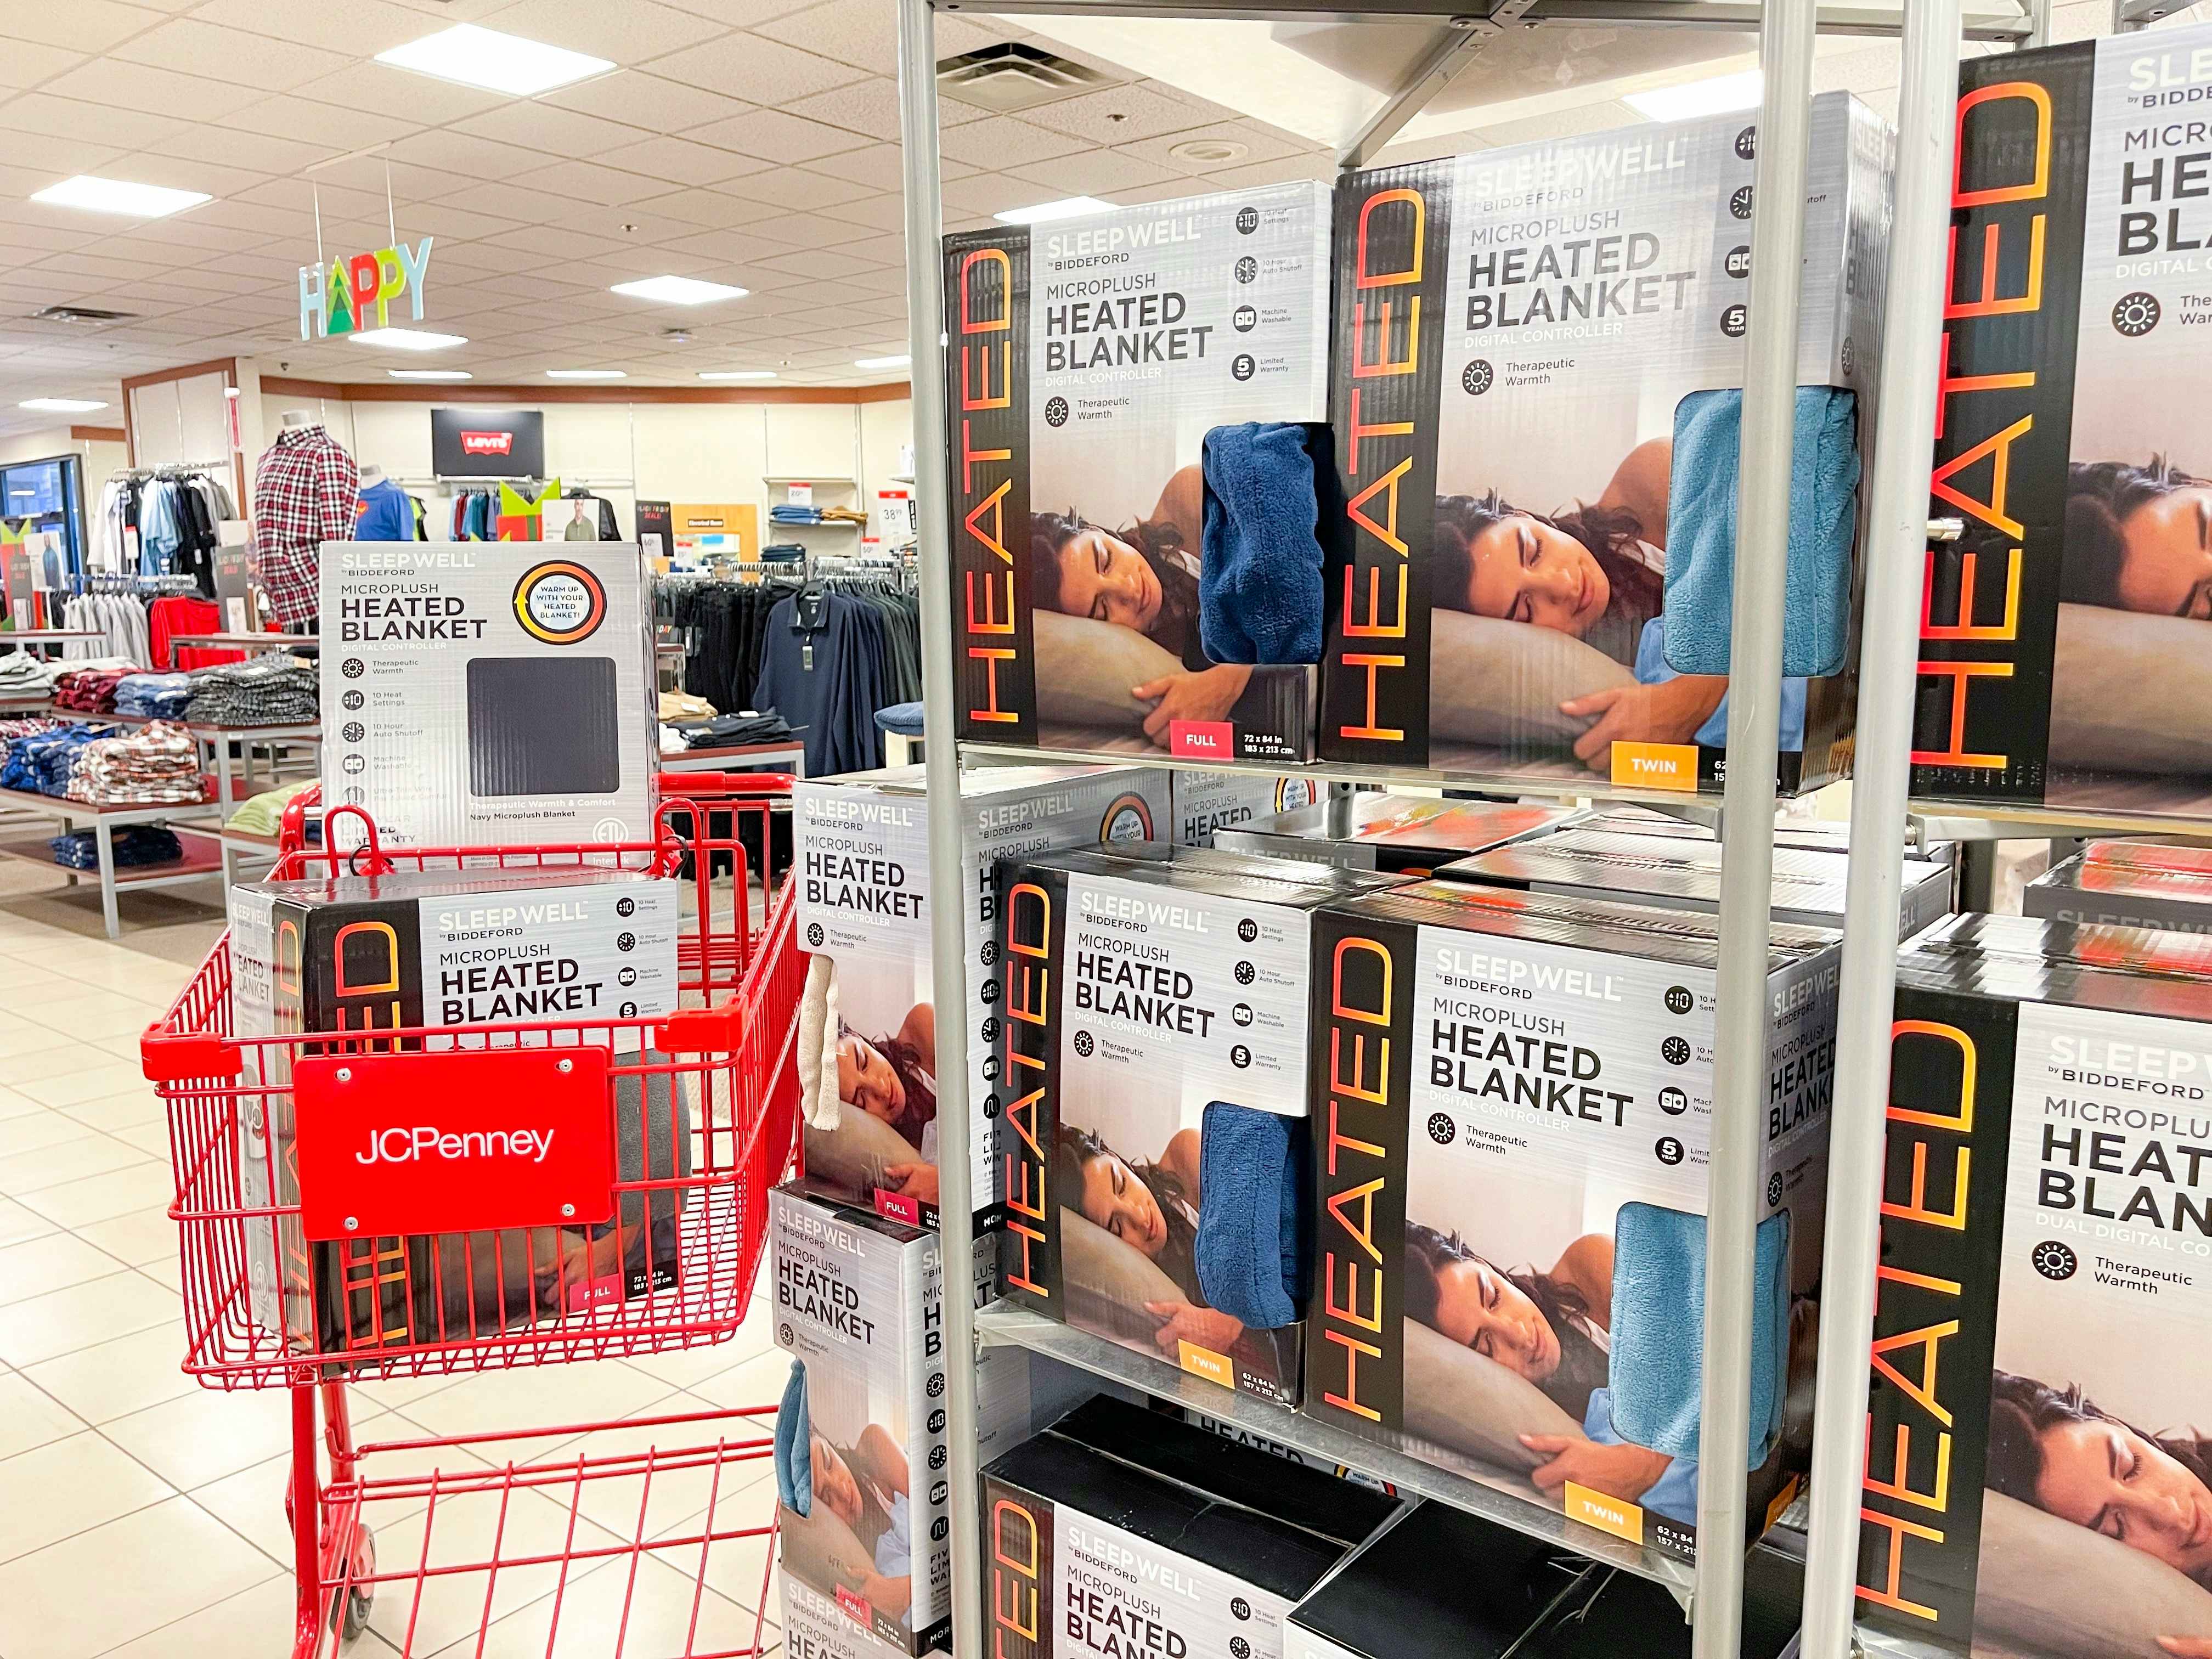 Boxes of heated blankets in a JCPenney shopping cart parked next to a display of more heated blankets inside JCPenney.